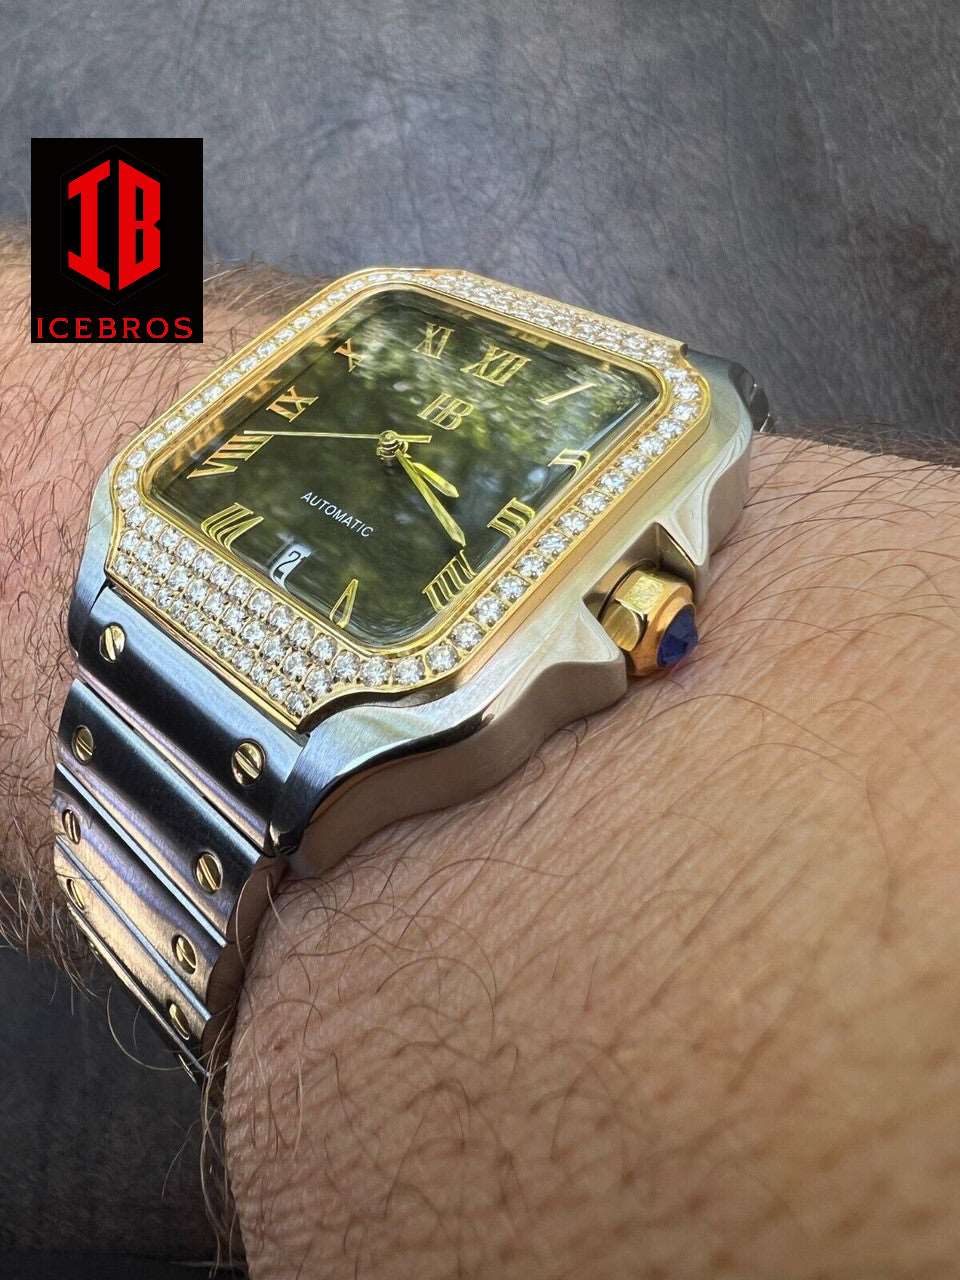 (24) Mens 2.5ct MOISSANITE Watch Hip Hop Two Tone White & Gold Iced Automatic Black Face